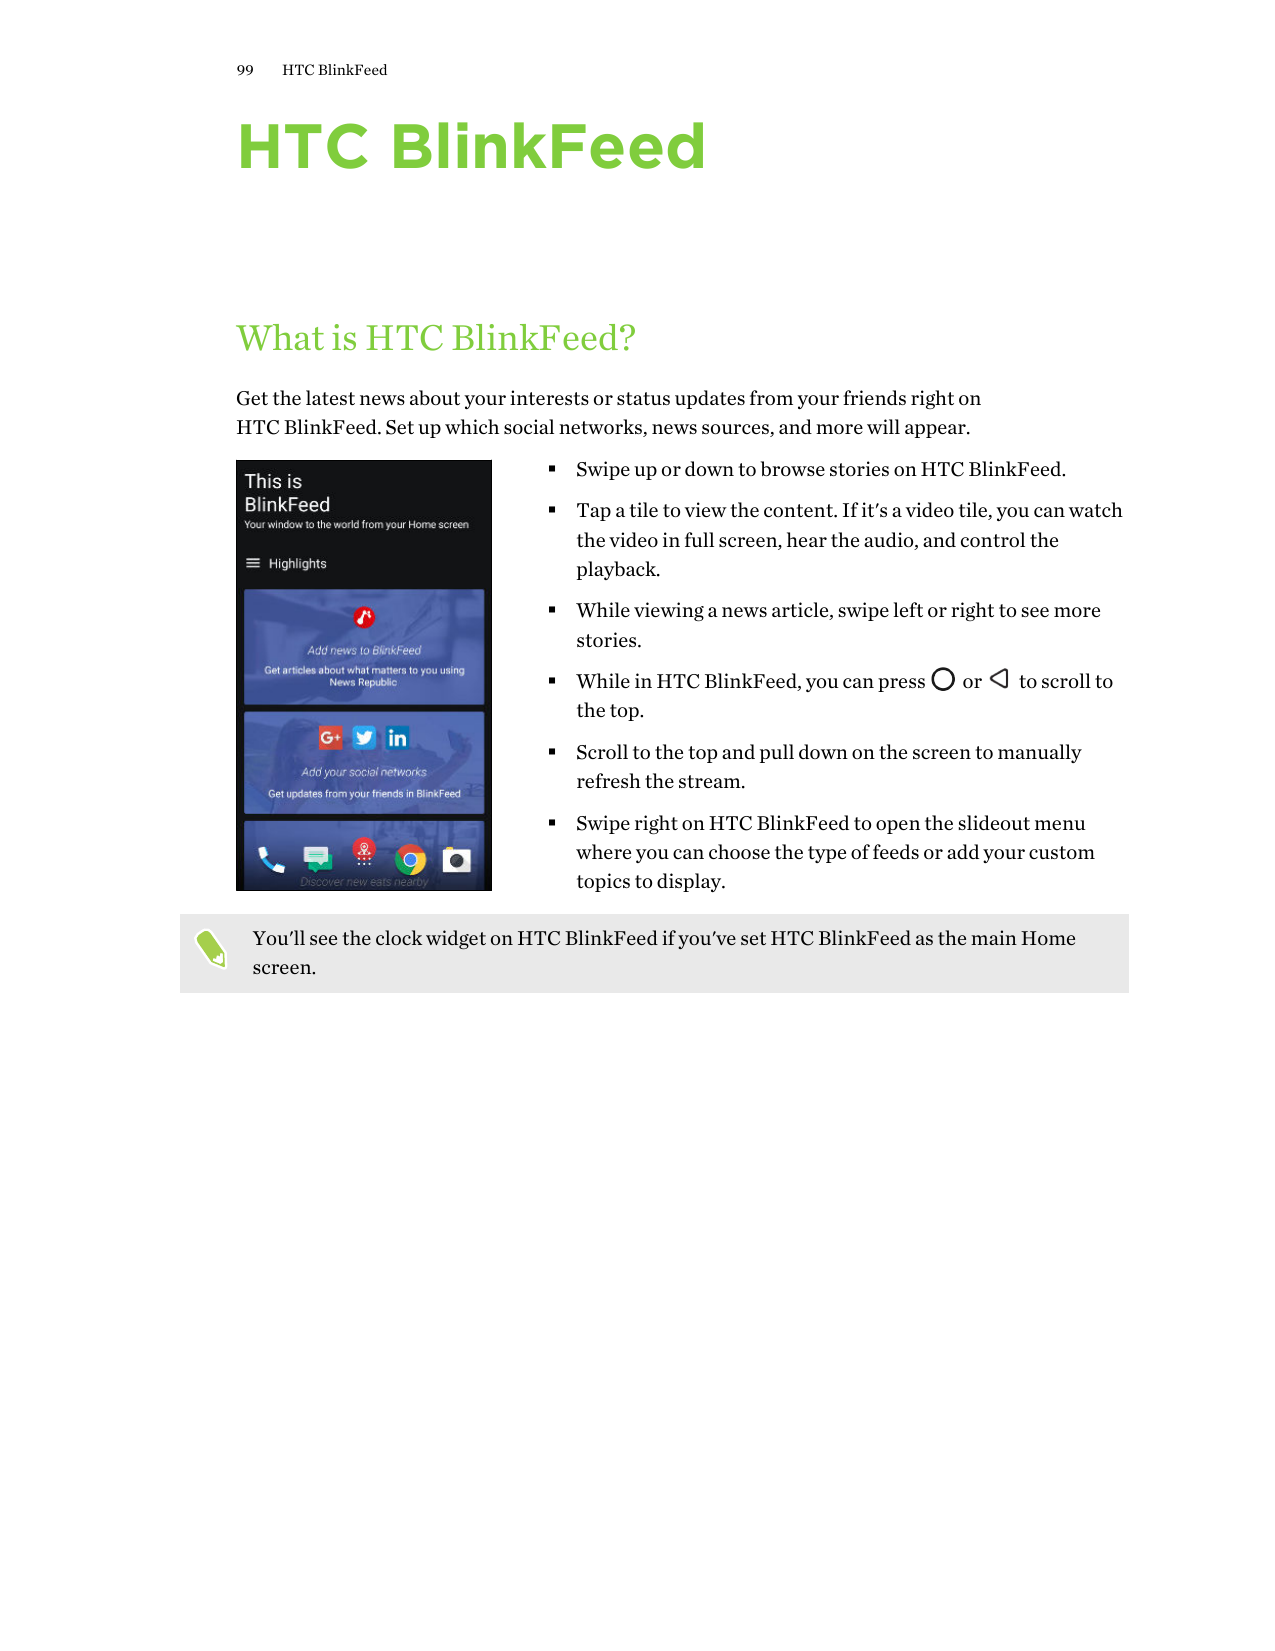 99HTC BlinkFeedHTC BlinkFeedWhat is HTC BlinkFeed?Get the latest news about your interests or status updates from your friends r